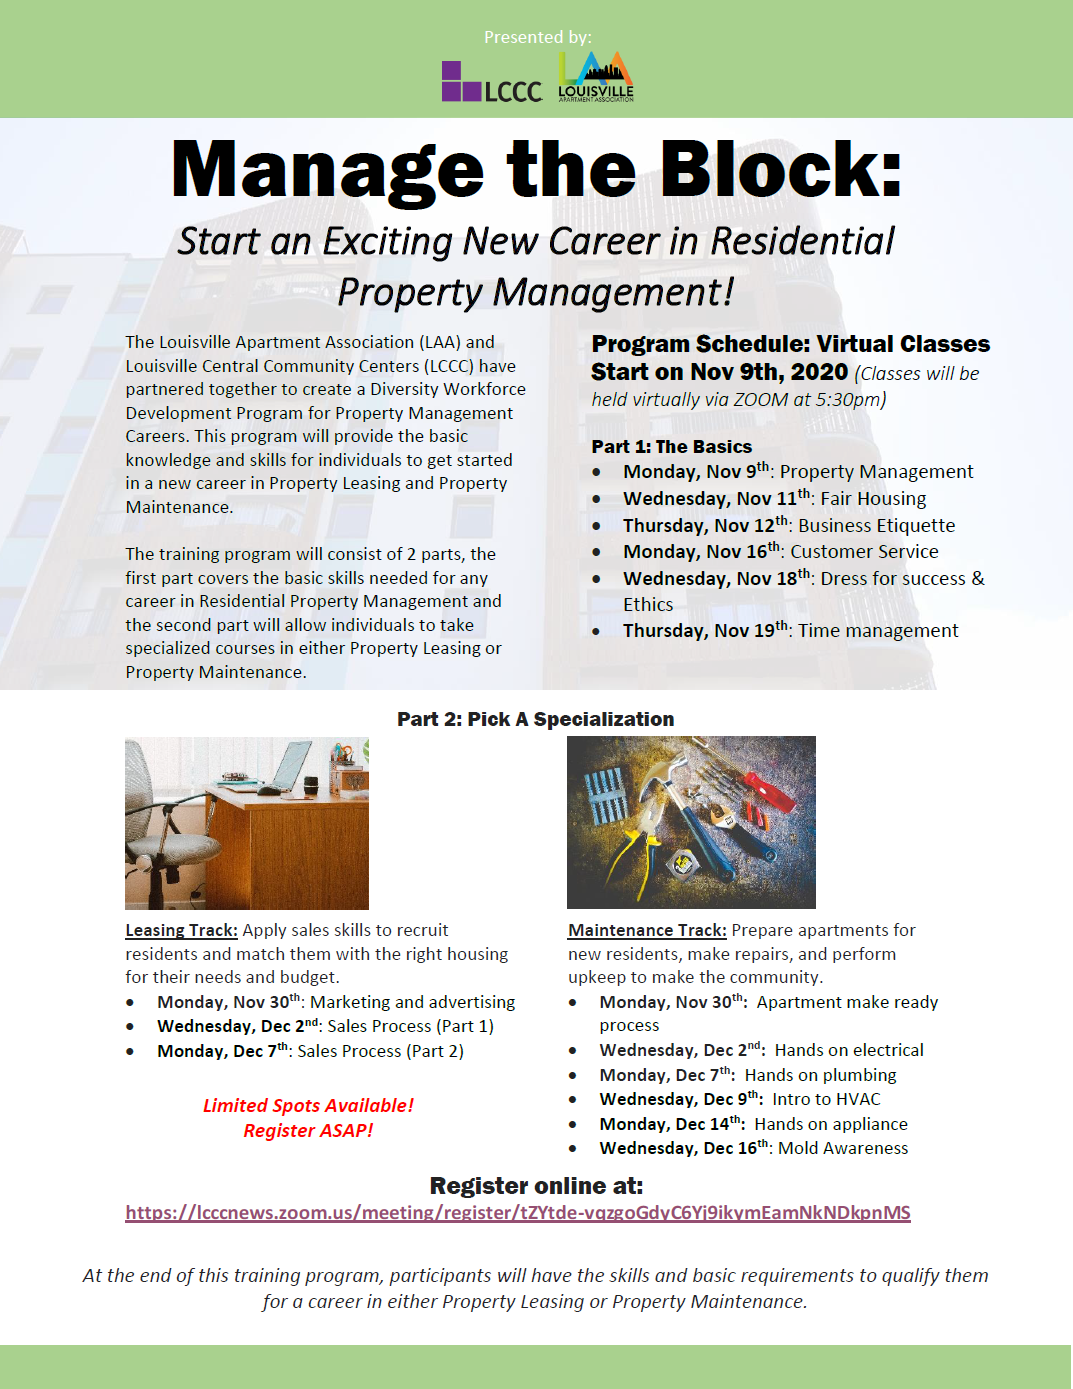 LAA & LCCC Presents Manage the Block: Maintenance Track